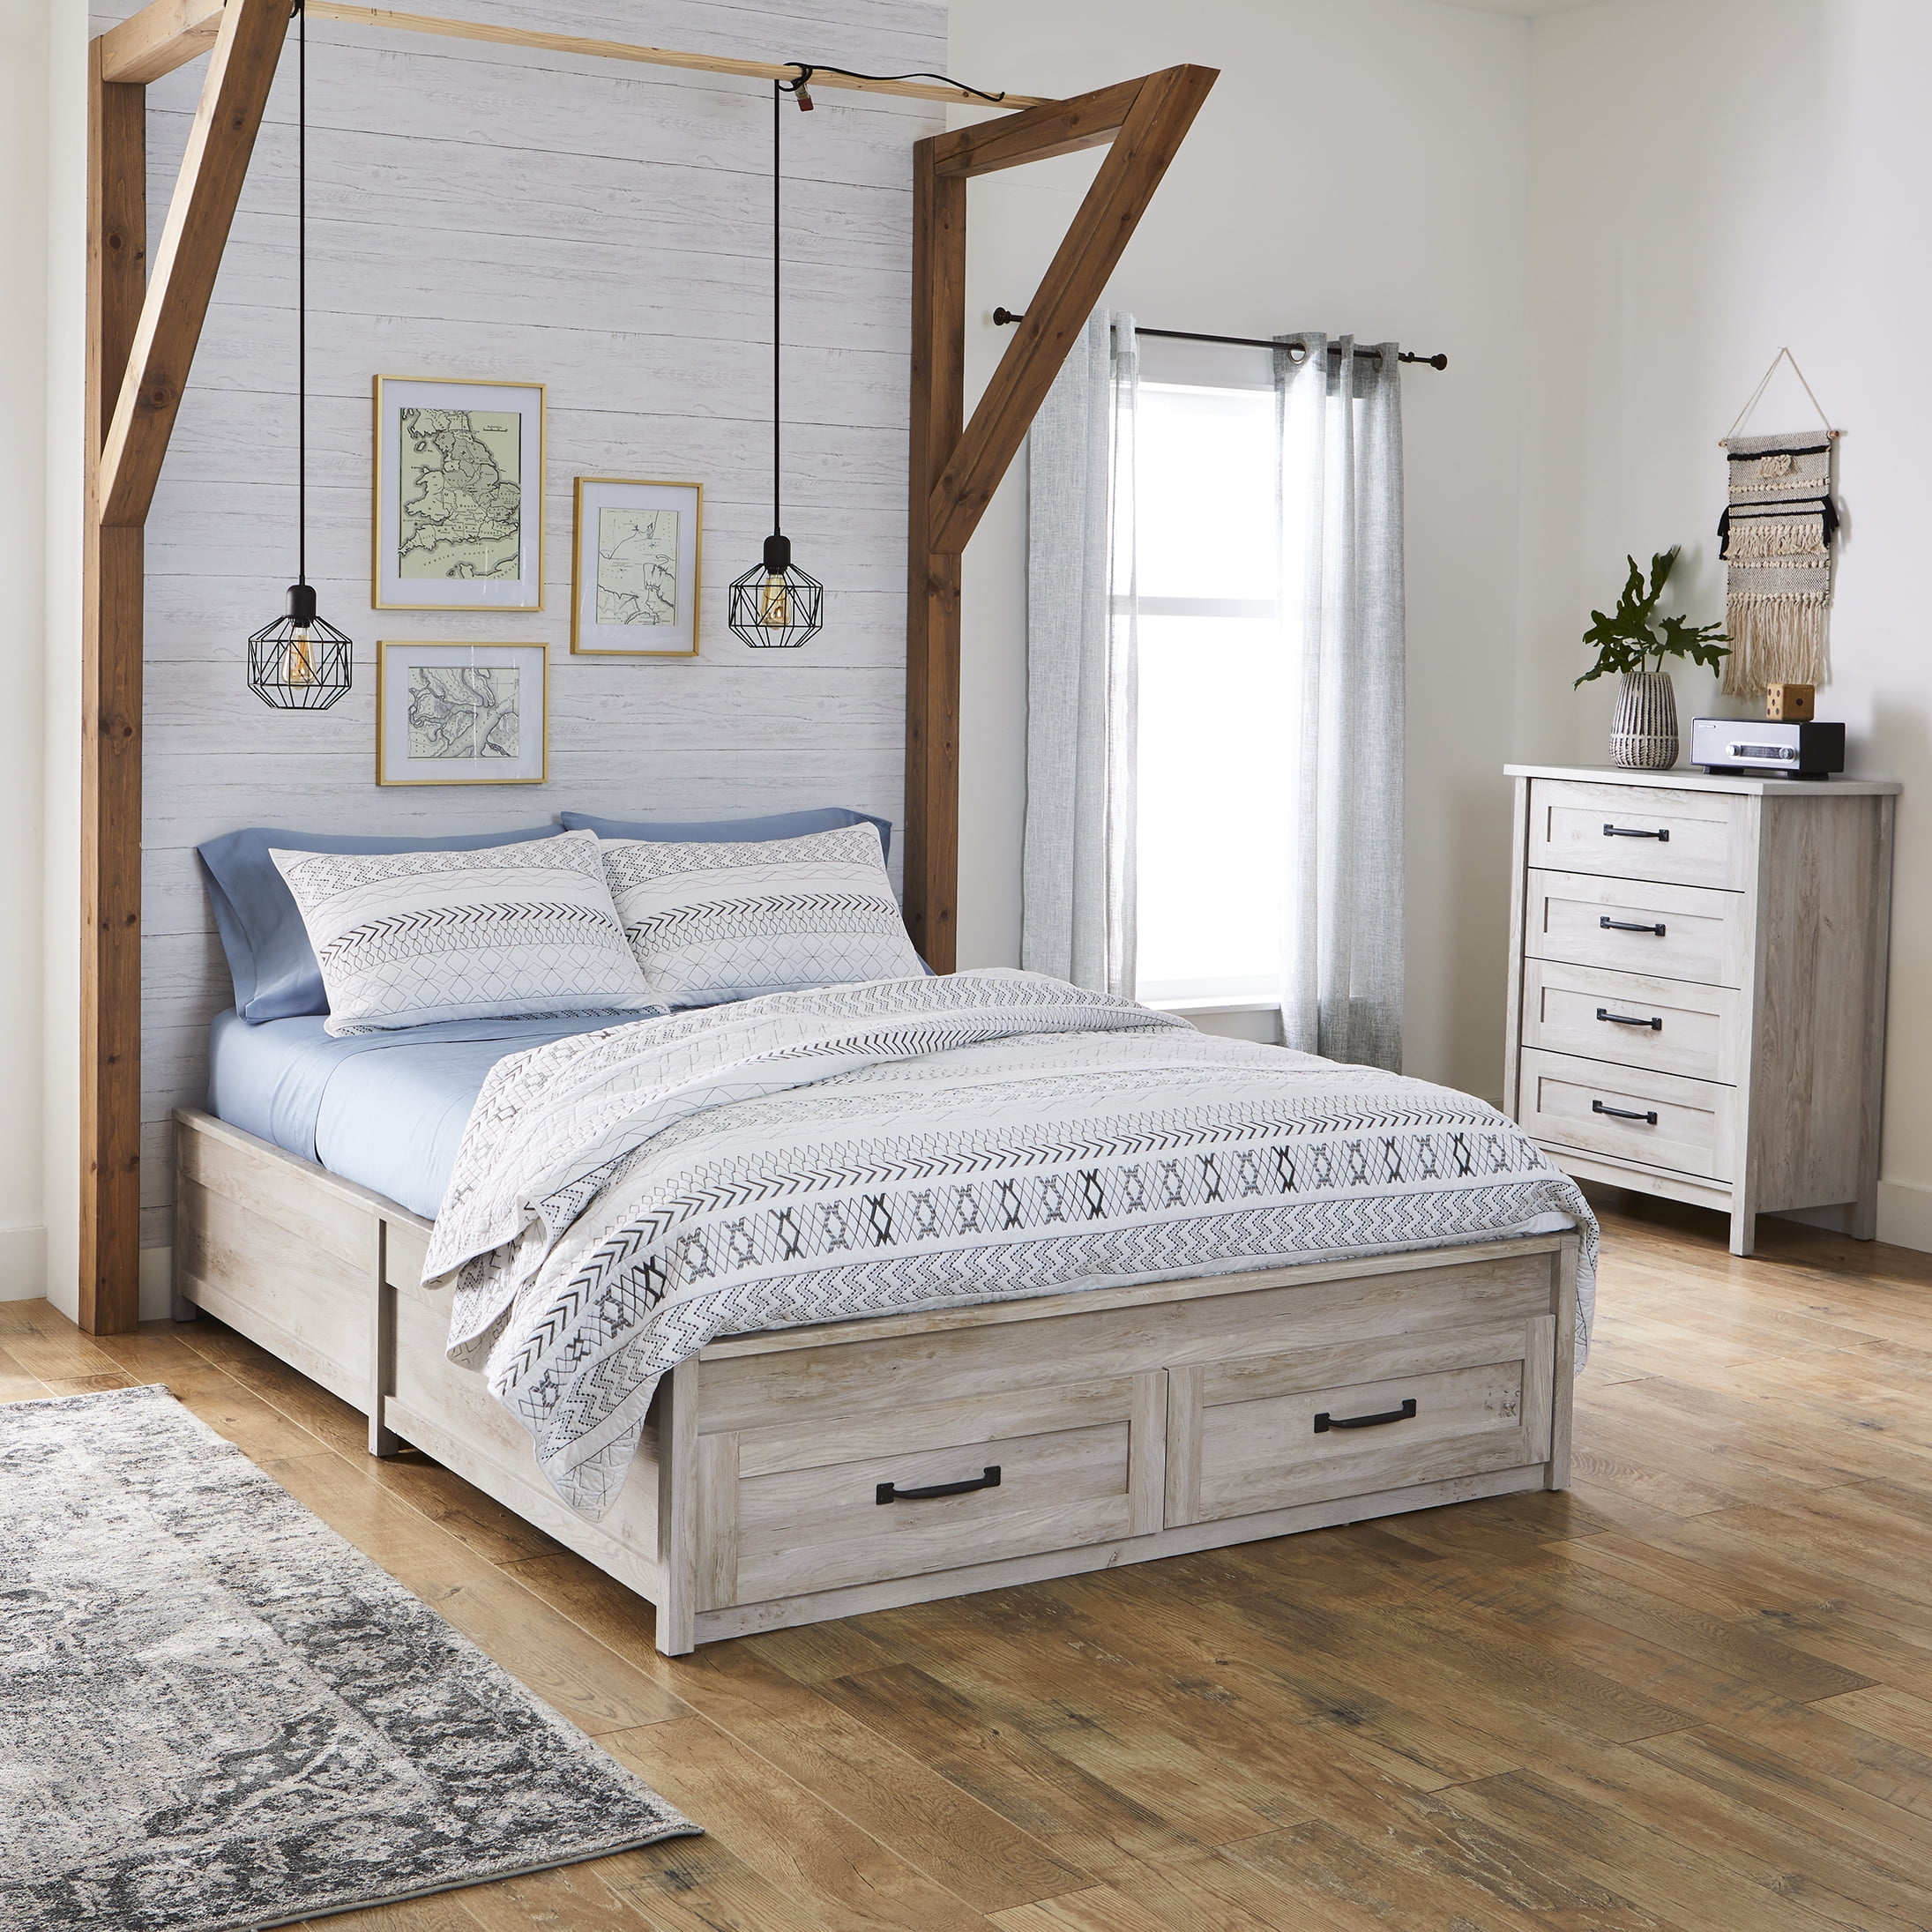 Better Homes & Gardens Modern Farmhouse Queen Platform Bed with Storage, Rustic White Finish